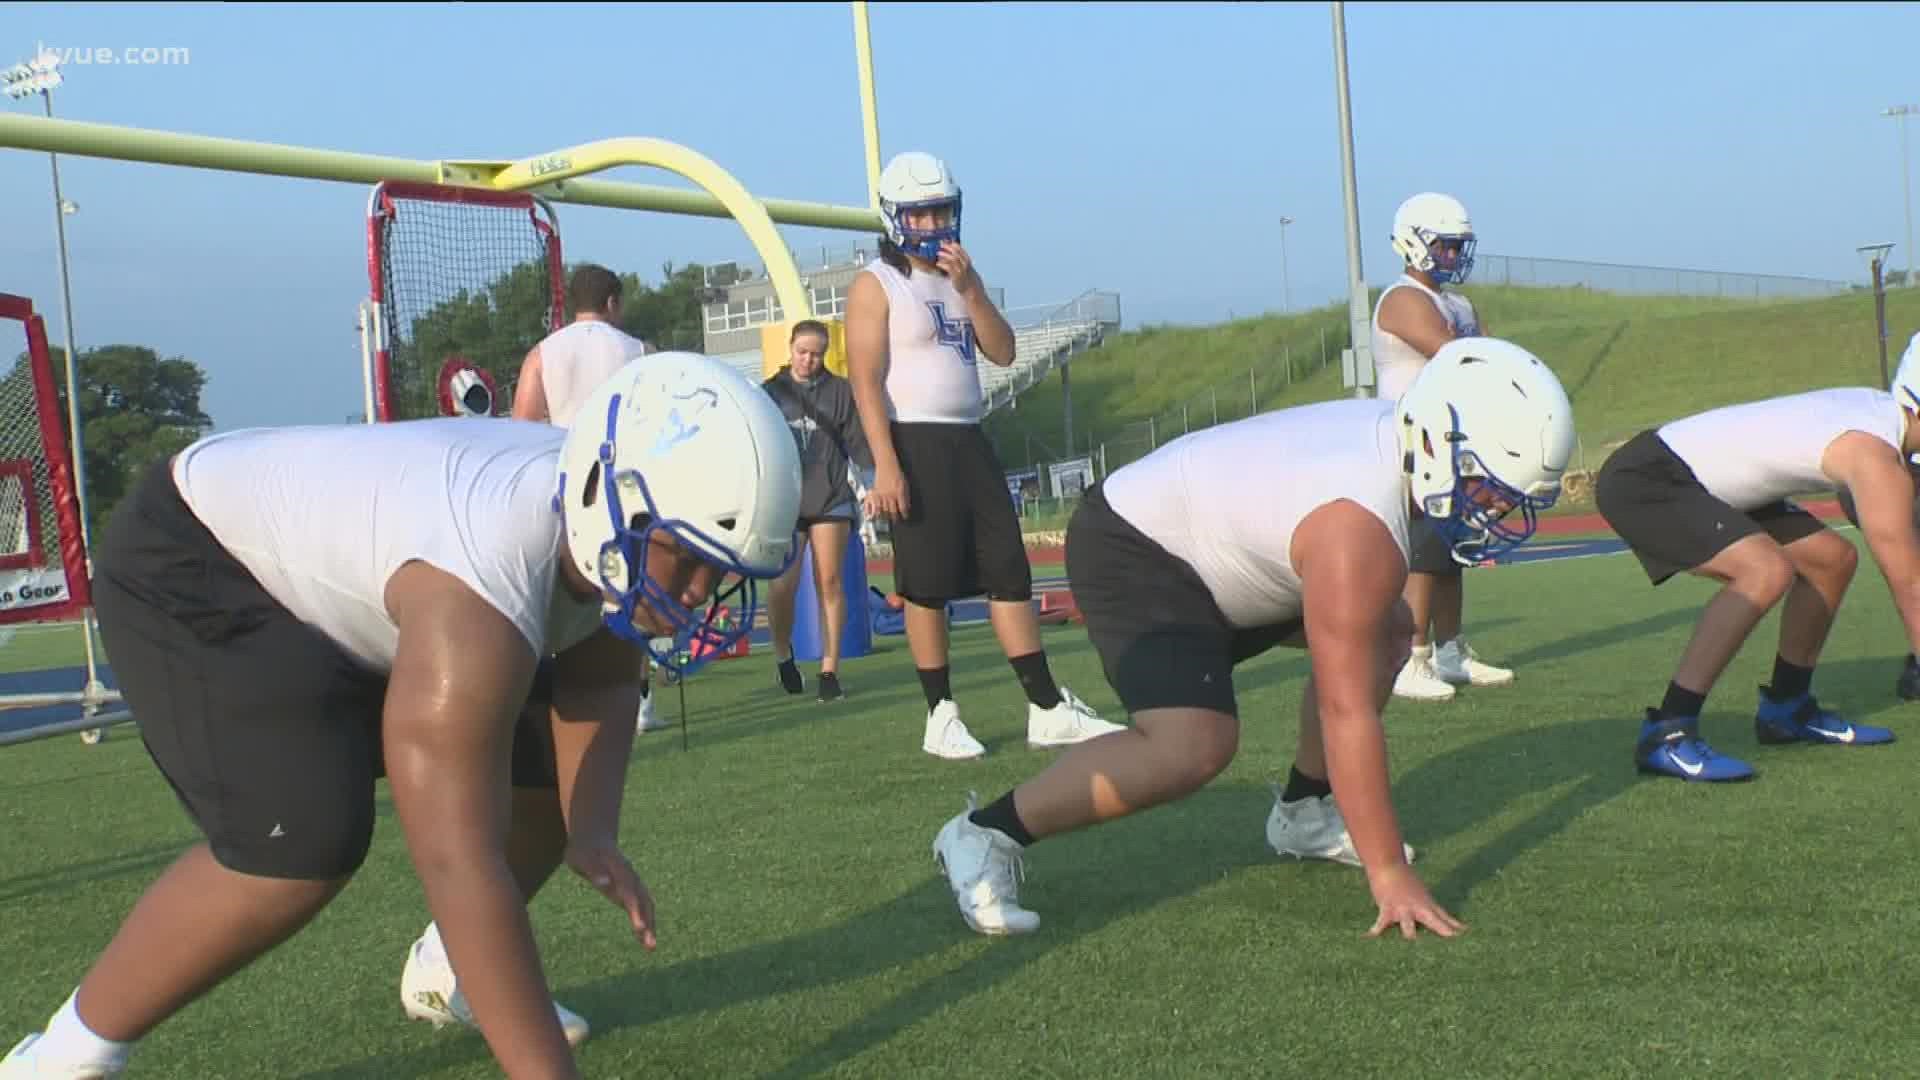 On Camping with KVUE, we check in with Lago Vista as it opens its camp. The Vikings are looking to build on their 2020 success.